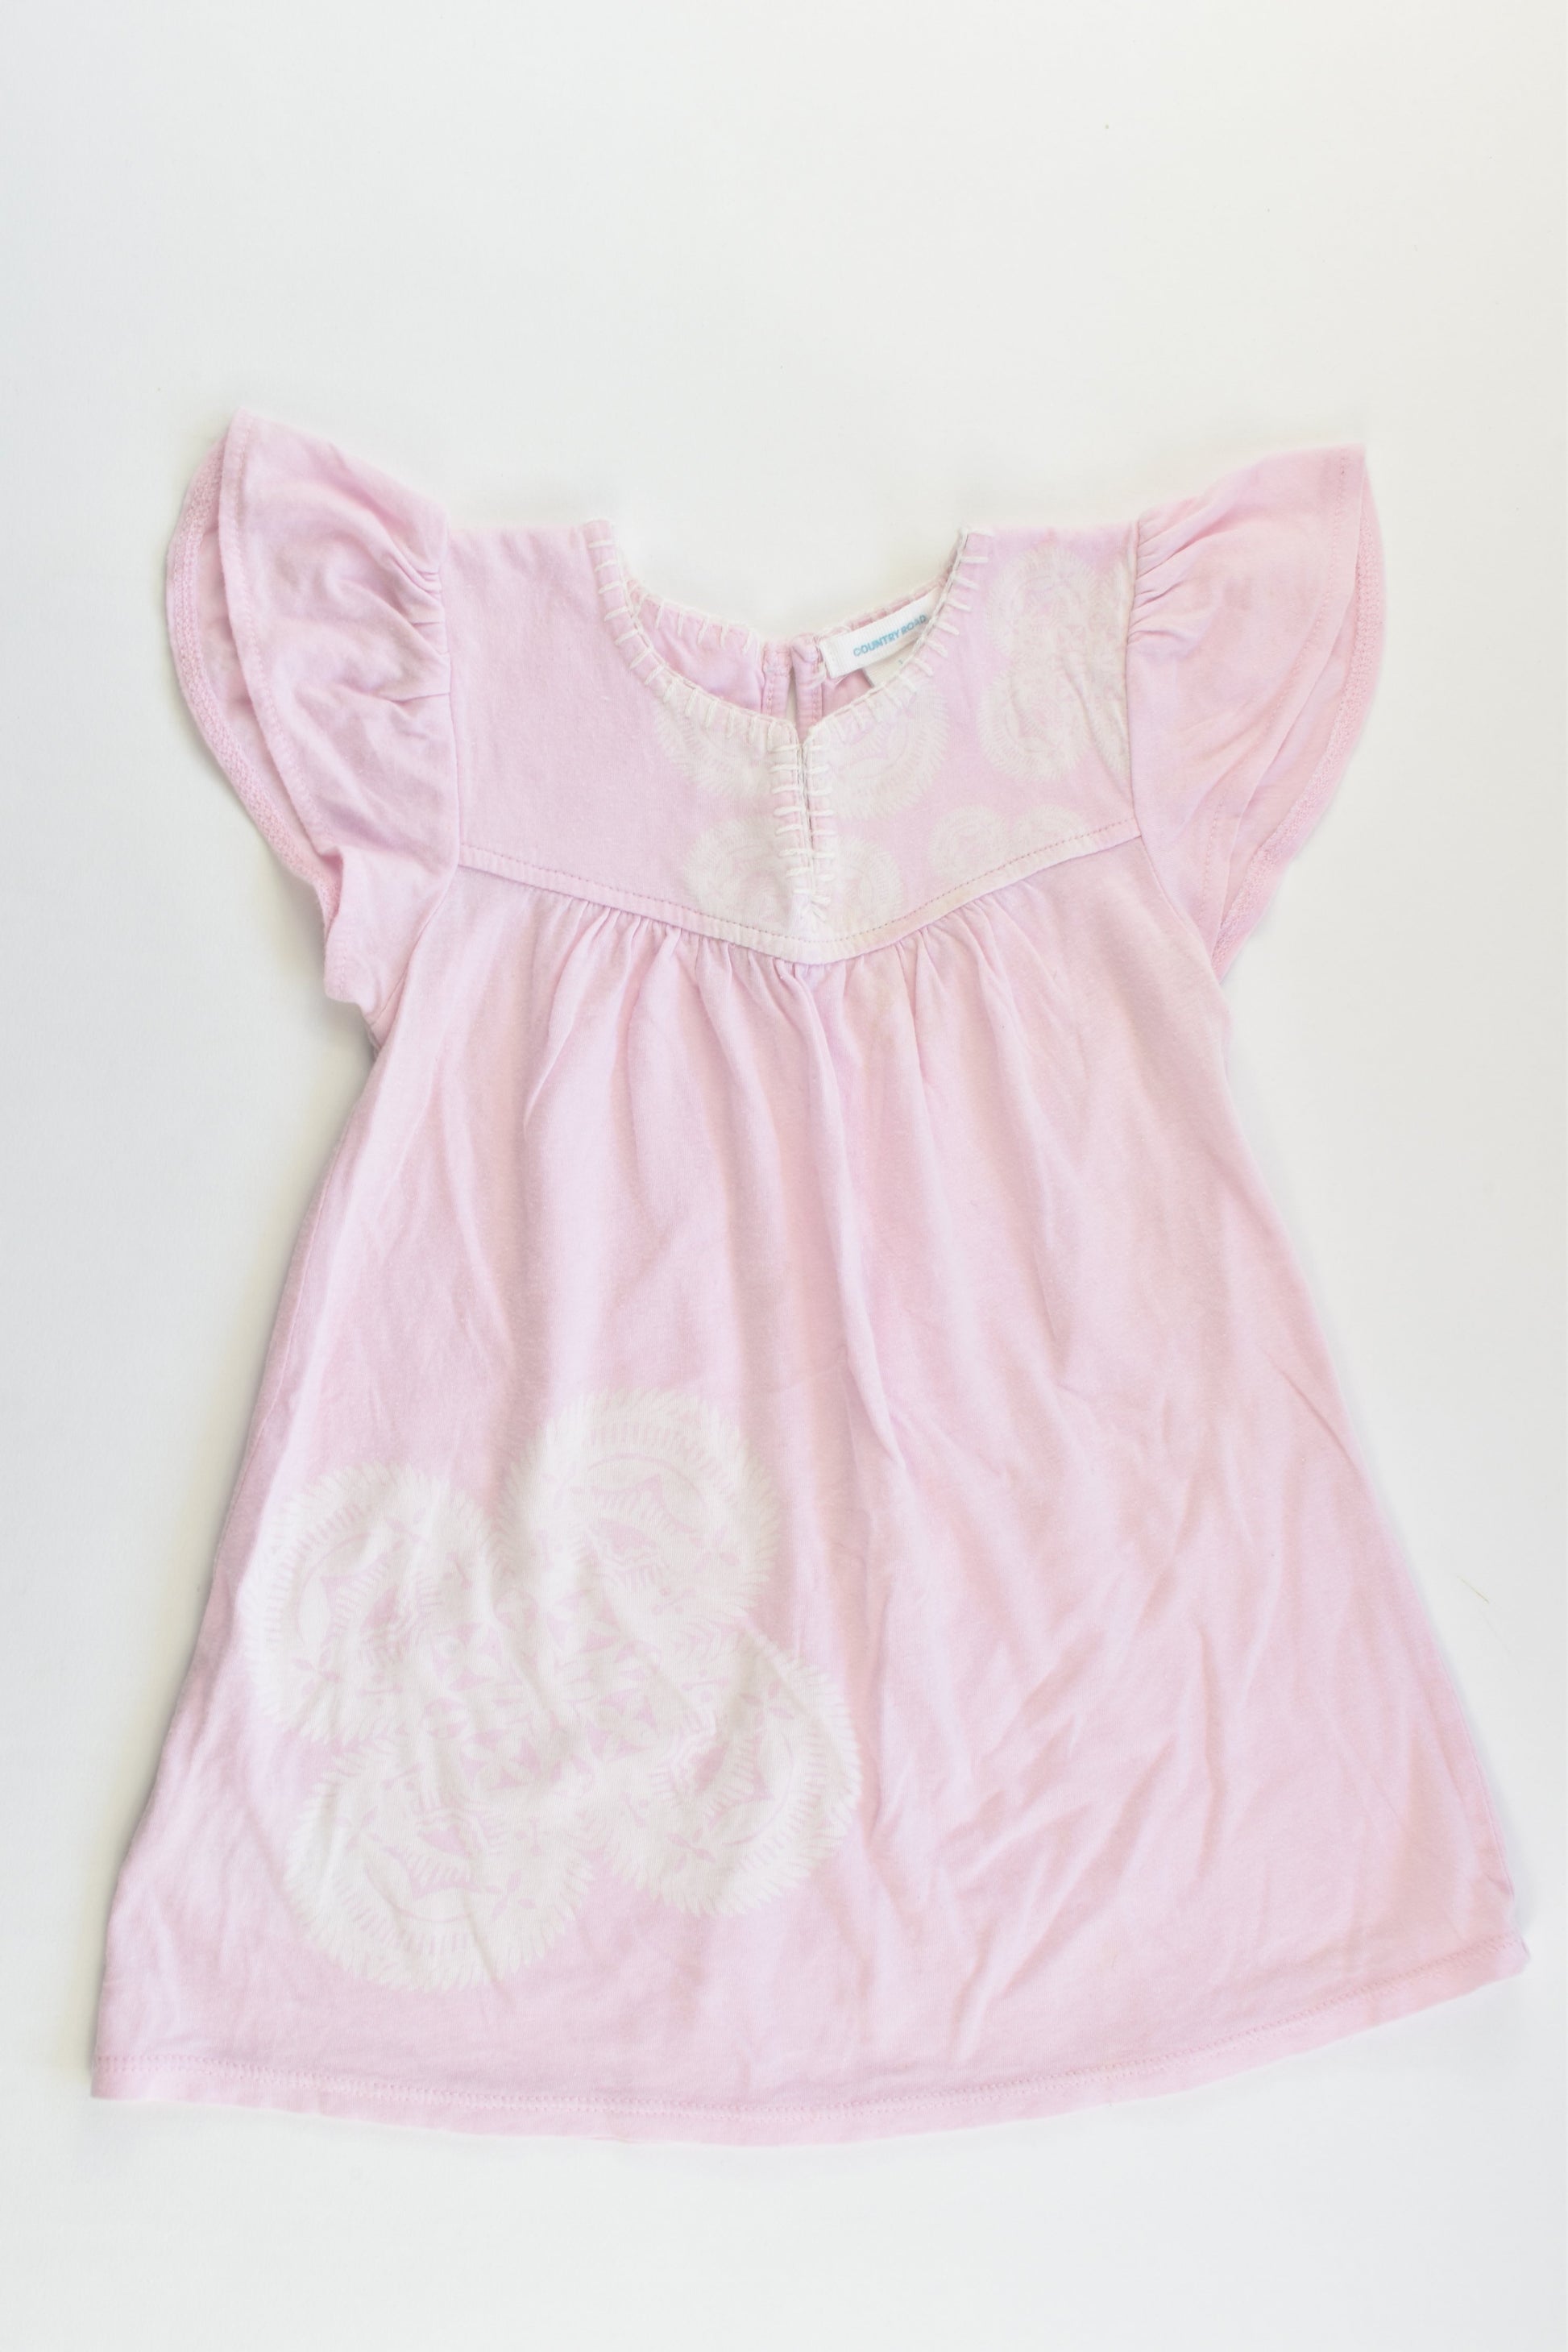 Country Road Size 1 (12-18 months) Tunic/Dress